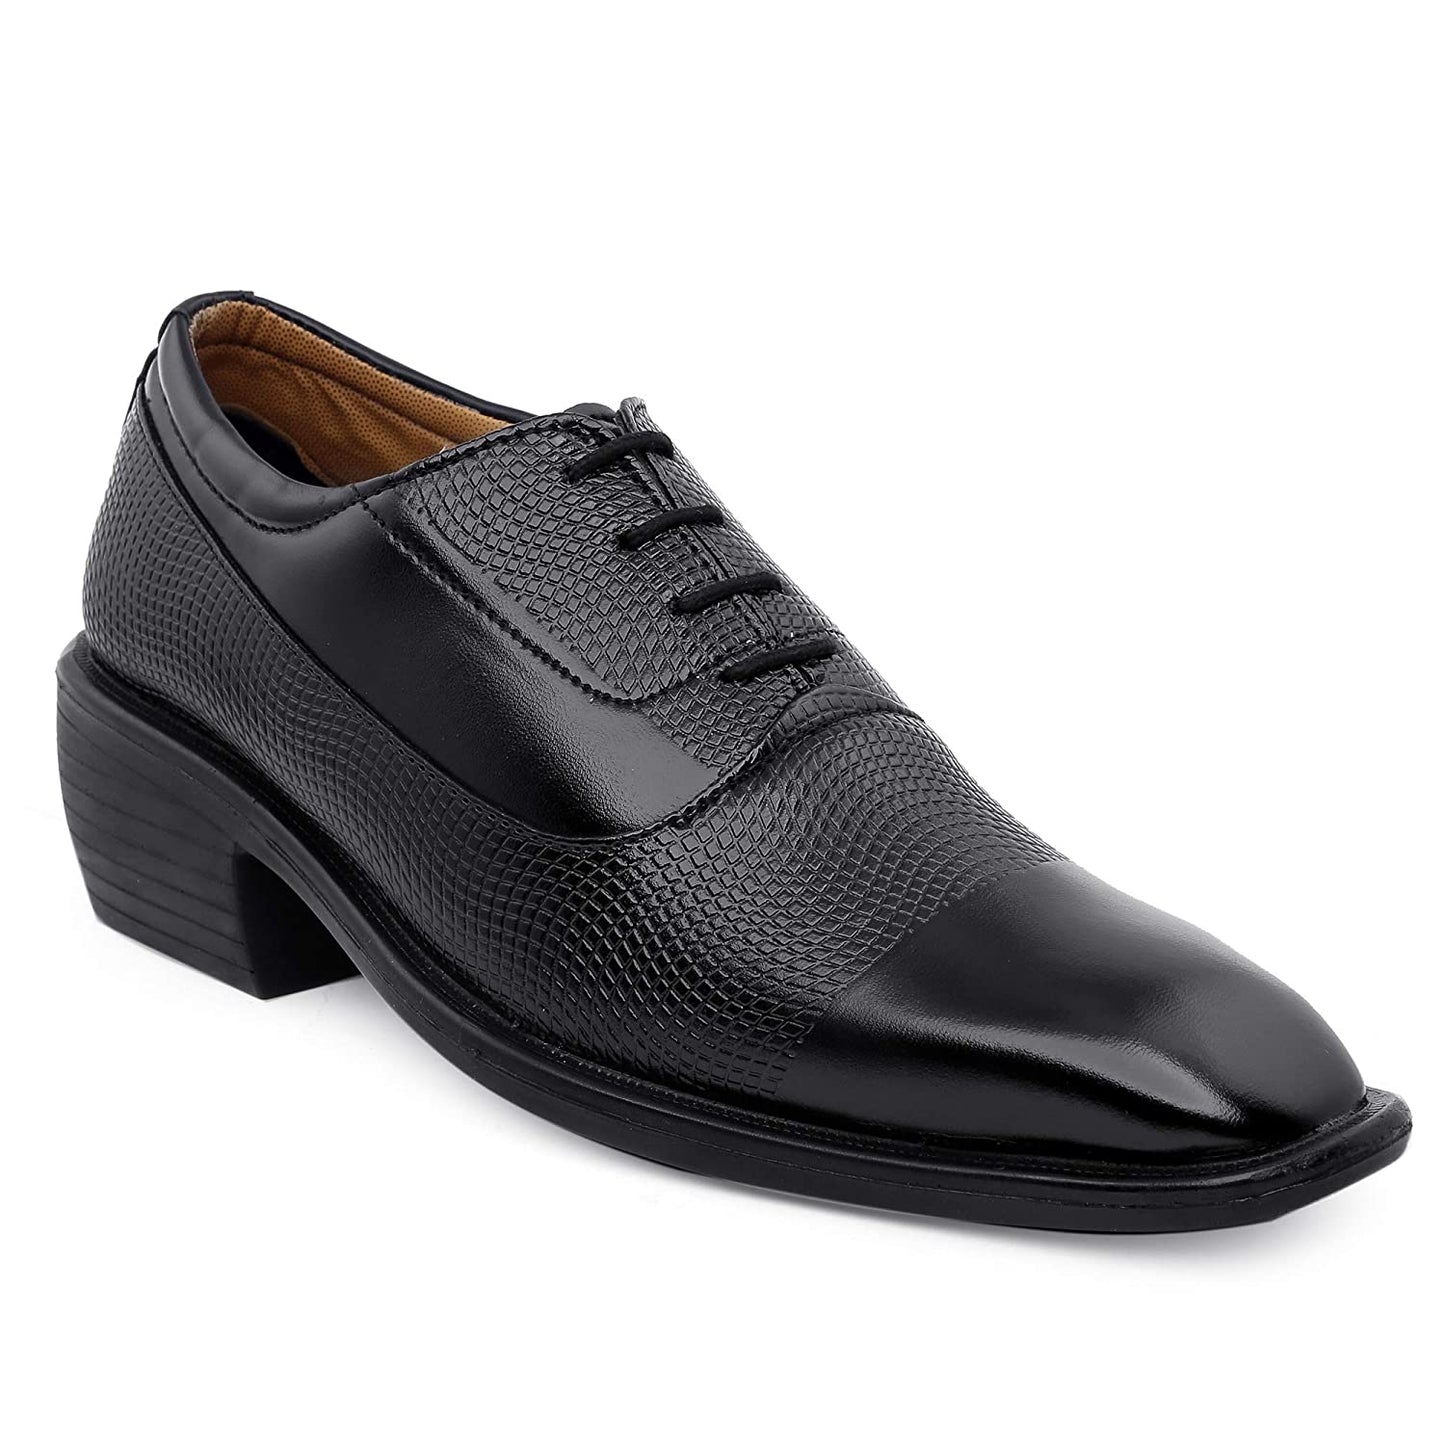 Classy Casual And Formal Business Wear Black Lace-Up Shoes-JonasParamount